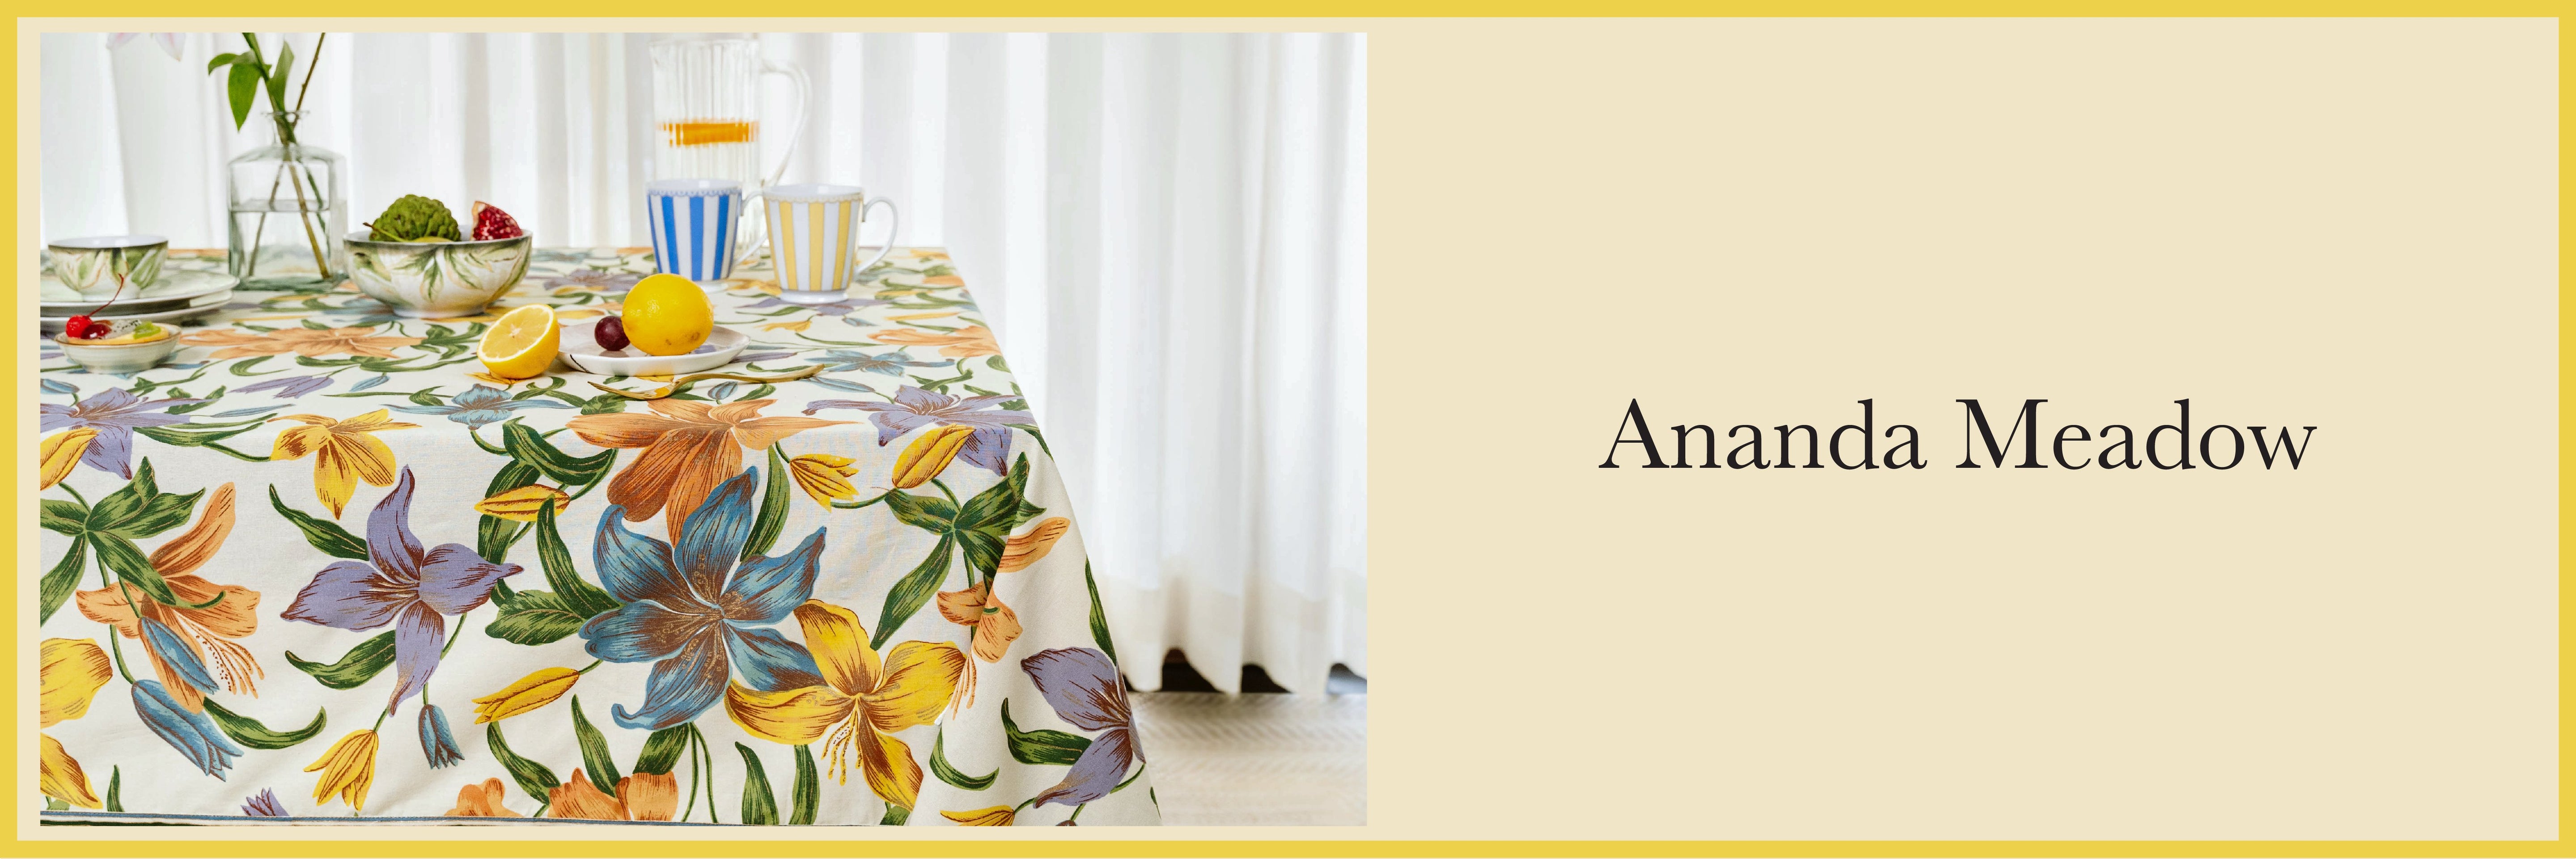 Ananda Meadow - Dinning Collection